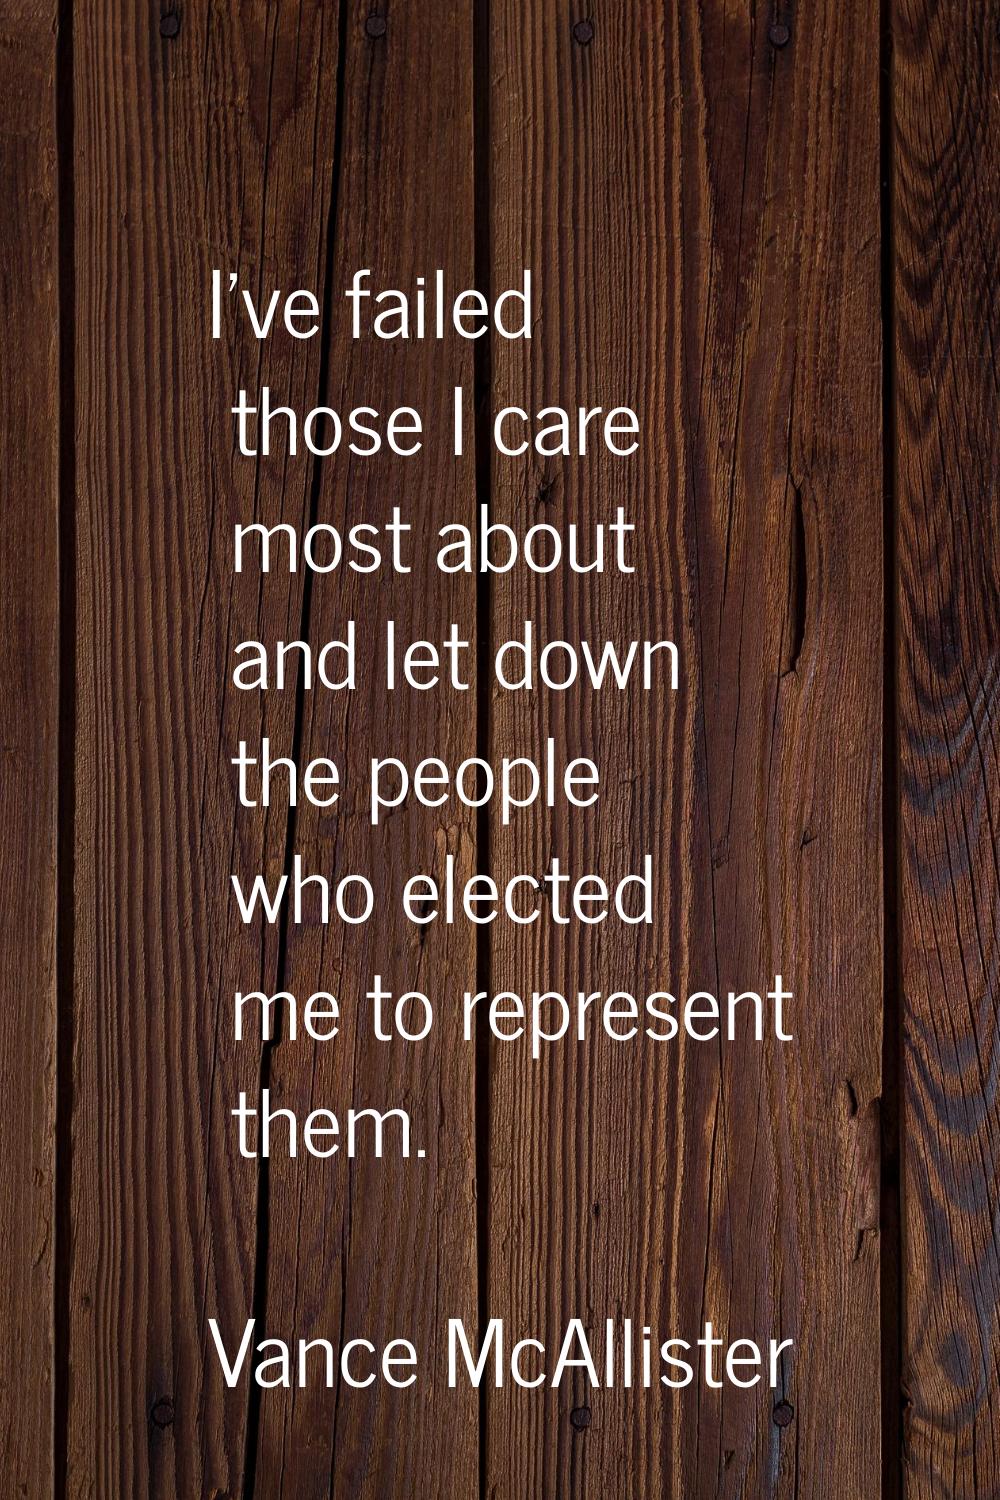 I've failed those I care most about and let down the people who elected me to represent them.